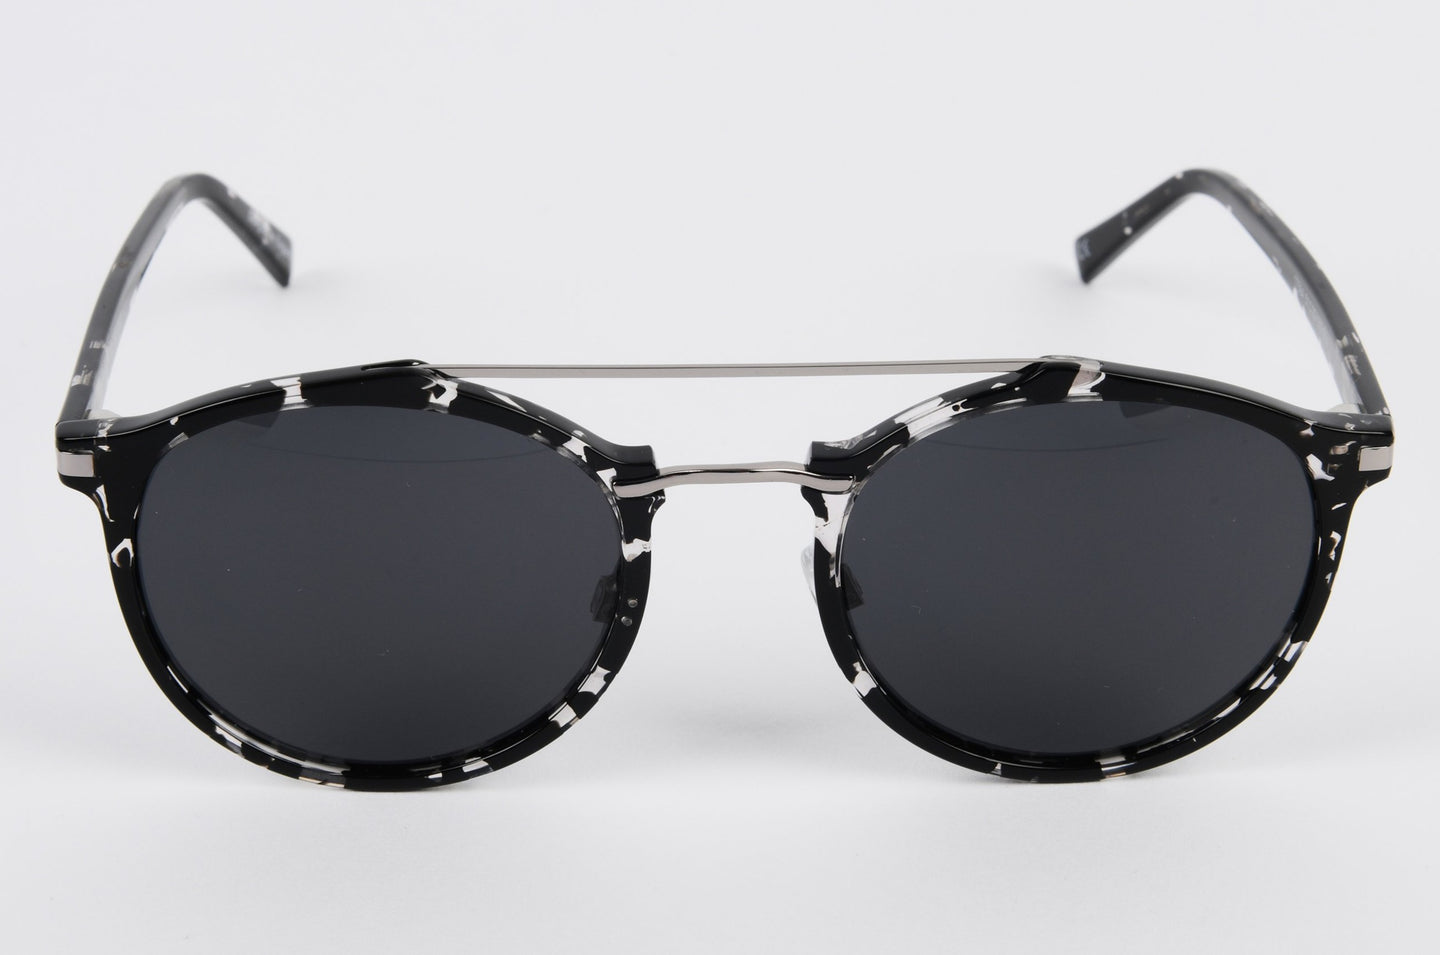 grey and black sunglasses with tortoise shell design and double bridge